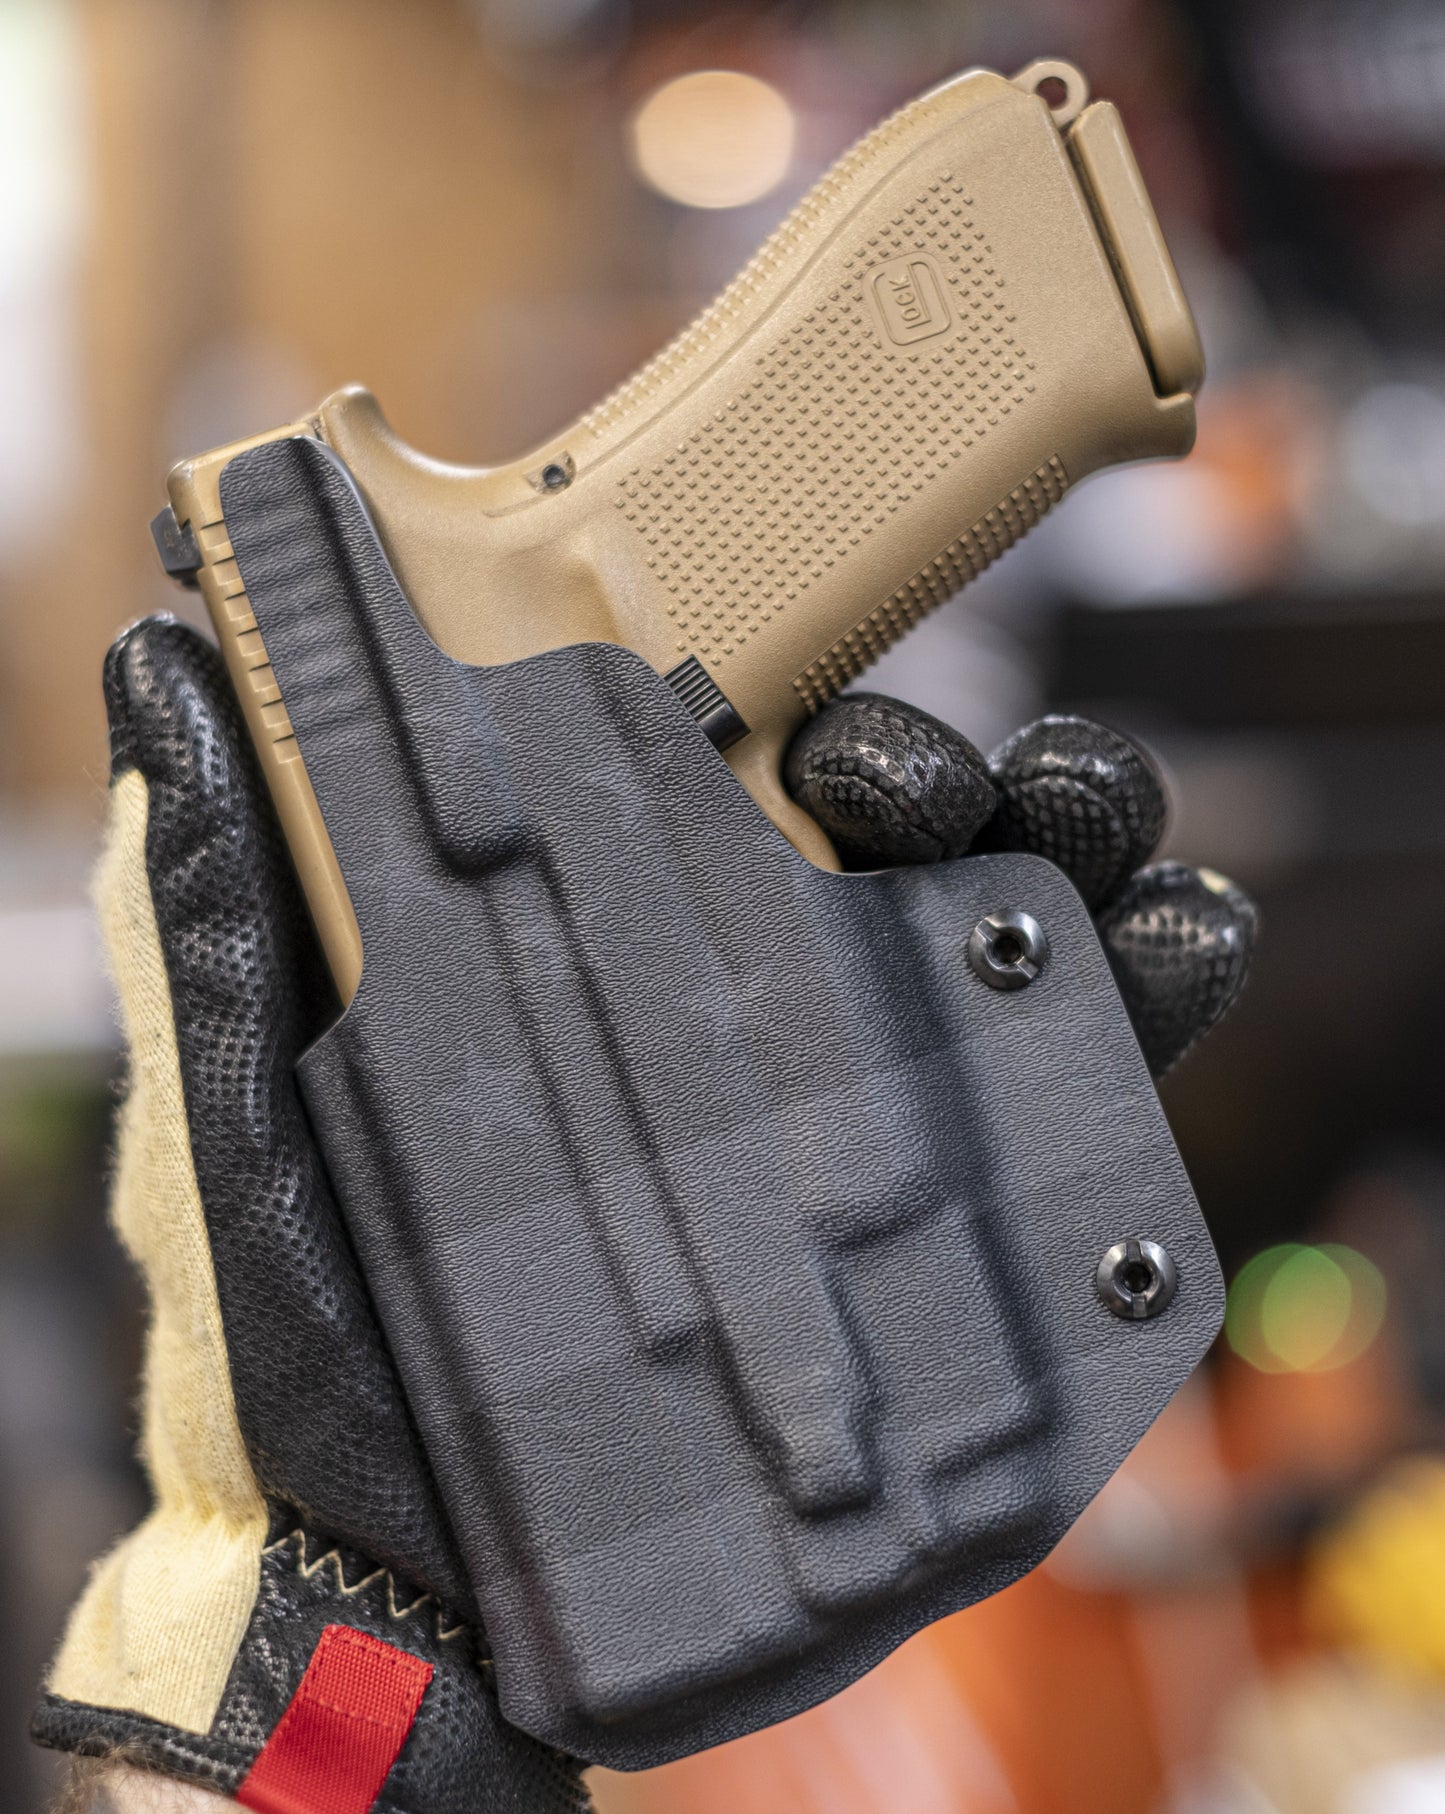 IWB Light Bearing Holster for a Glock with an Olight Baldr Mini in Black on Black American Flag infused Kydex.